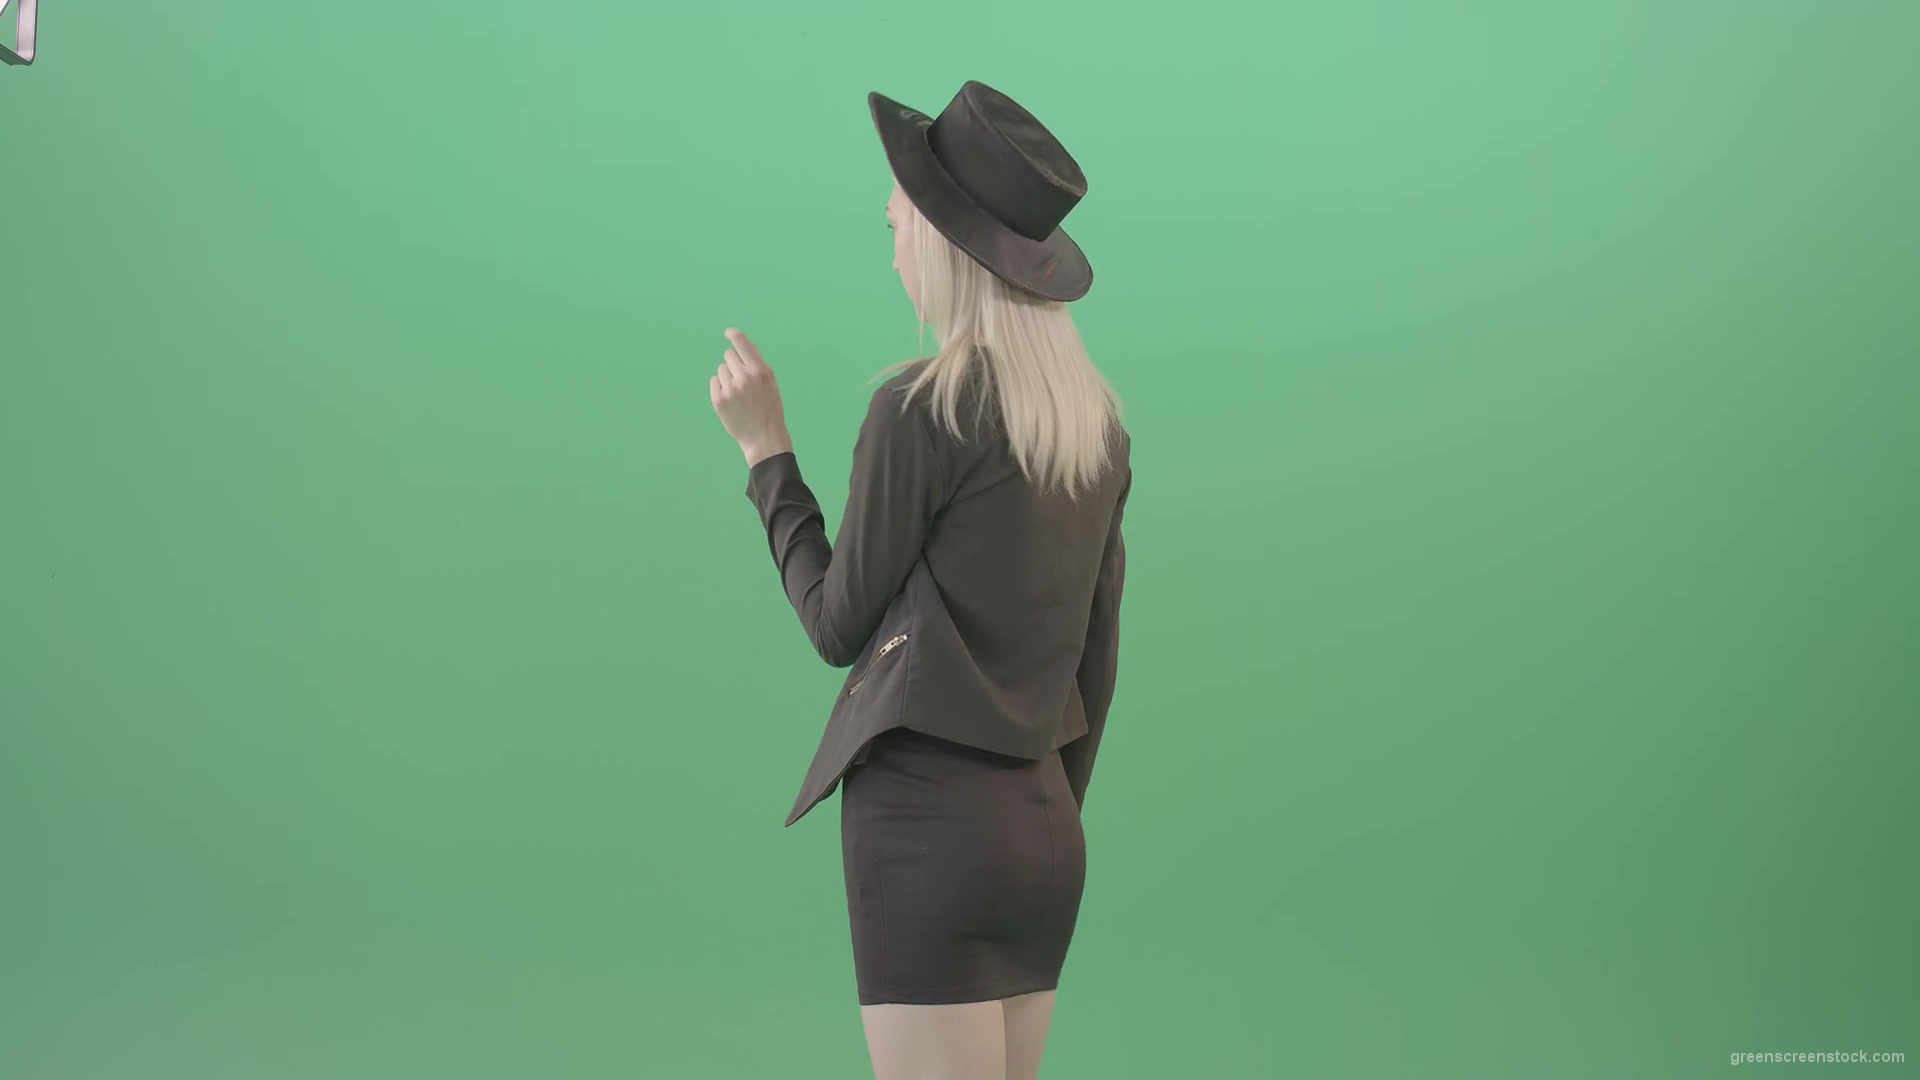 Back-view-black-costume-blonde-girl-looking-virtual-products-on-touch-screen-4K-Green-Screen-Video-Footage-1920_004 Green Screen Stock